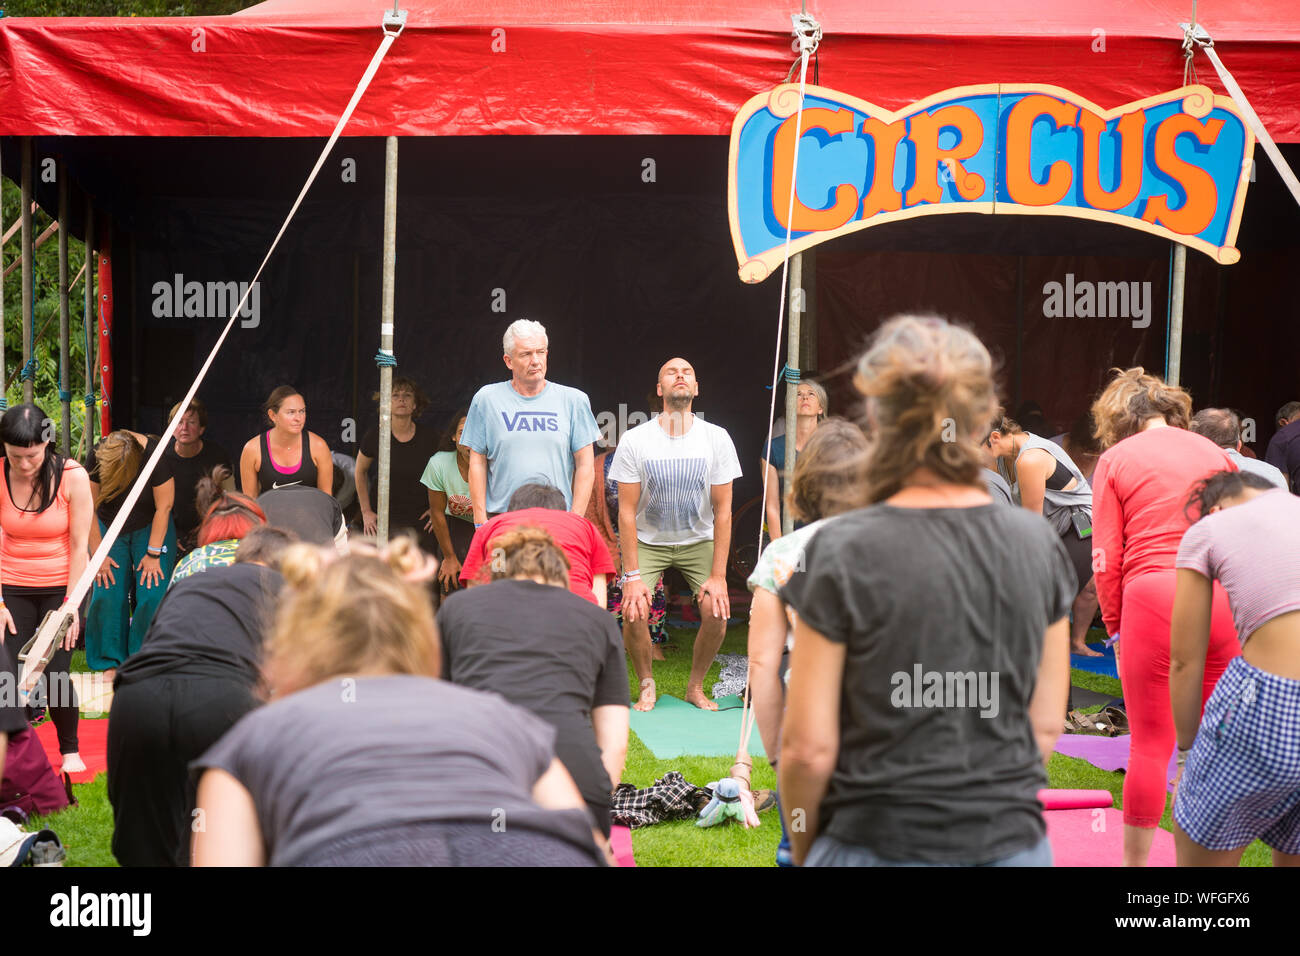 Dorset, UK. Saturday, 31 August, 2019. Views of the 2019 End of the Road Festival. Photo: Roger Garfield/Alamy Live News Stock Photo